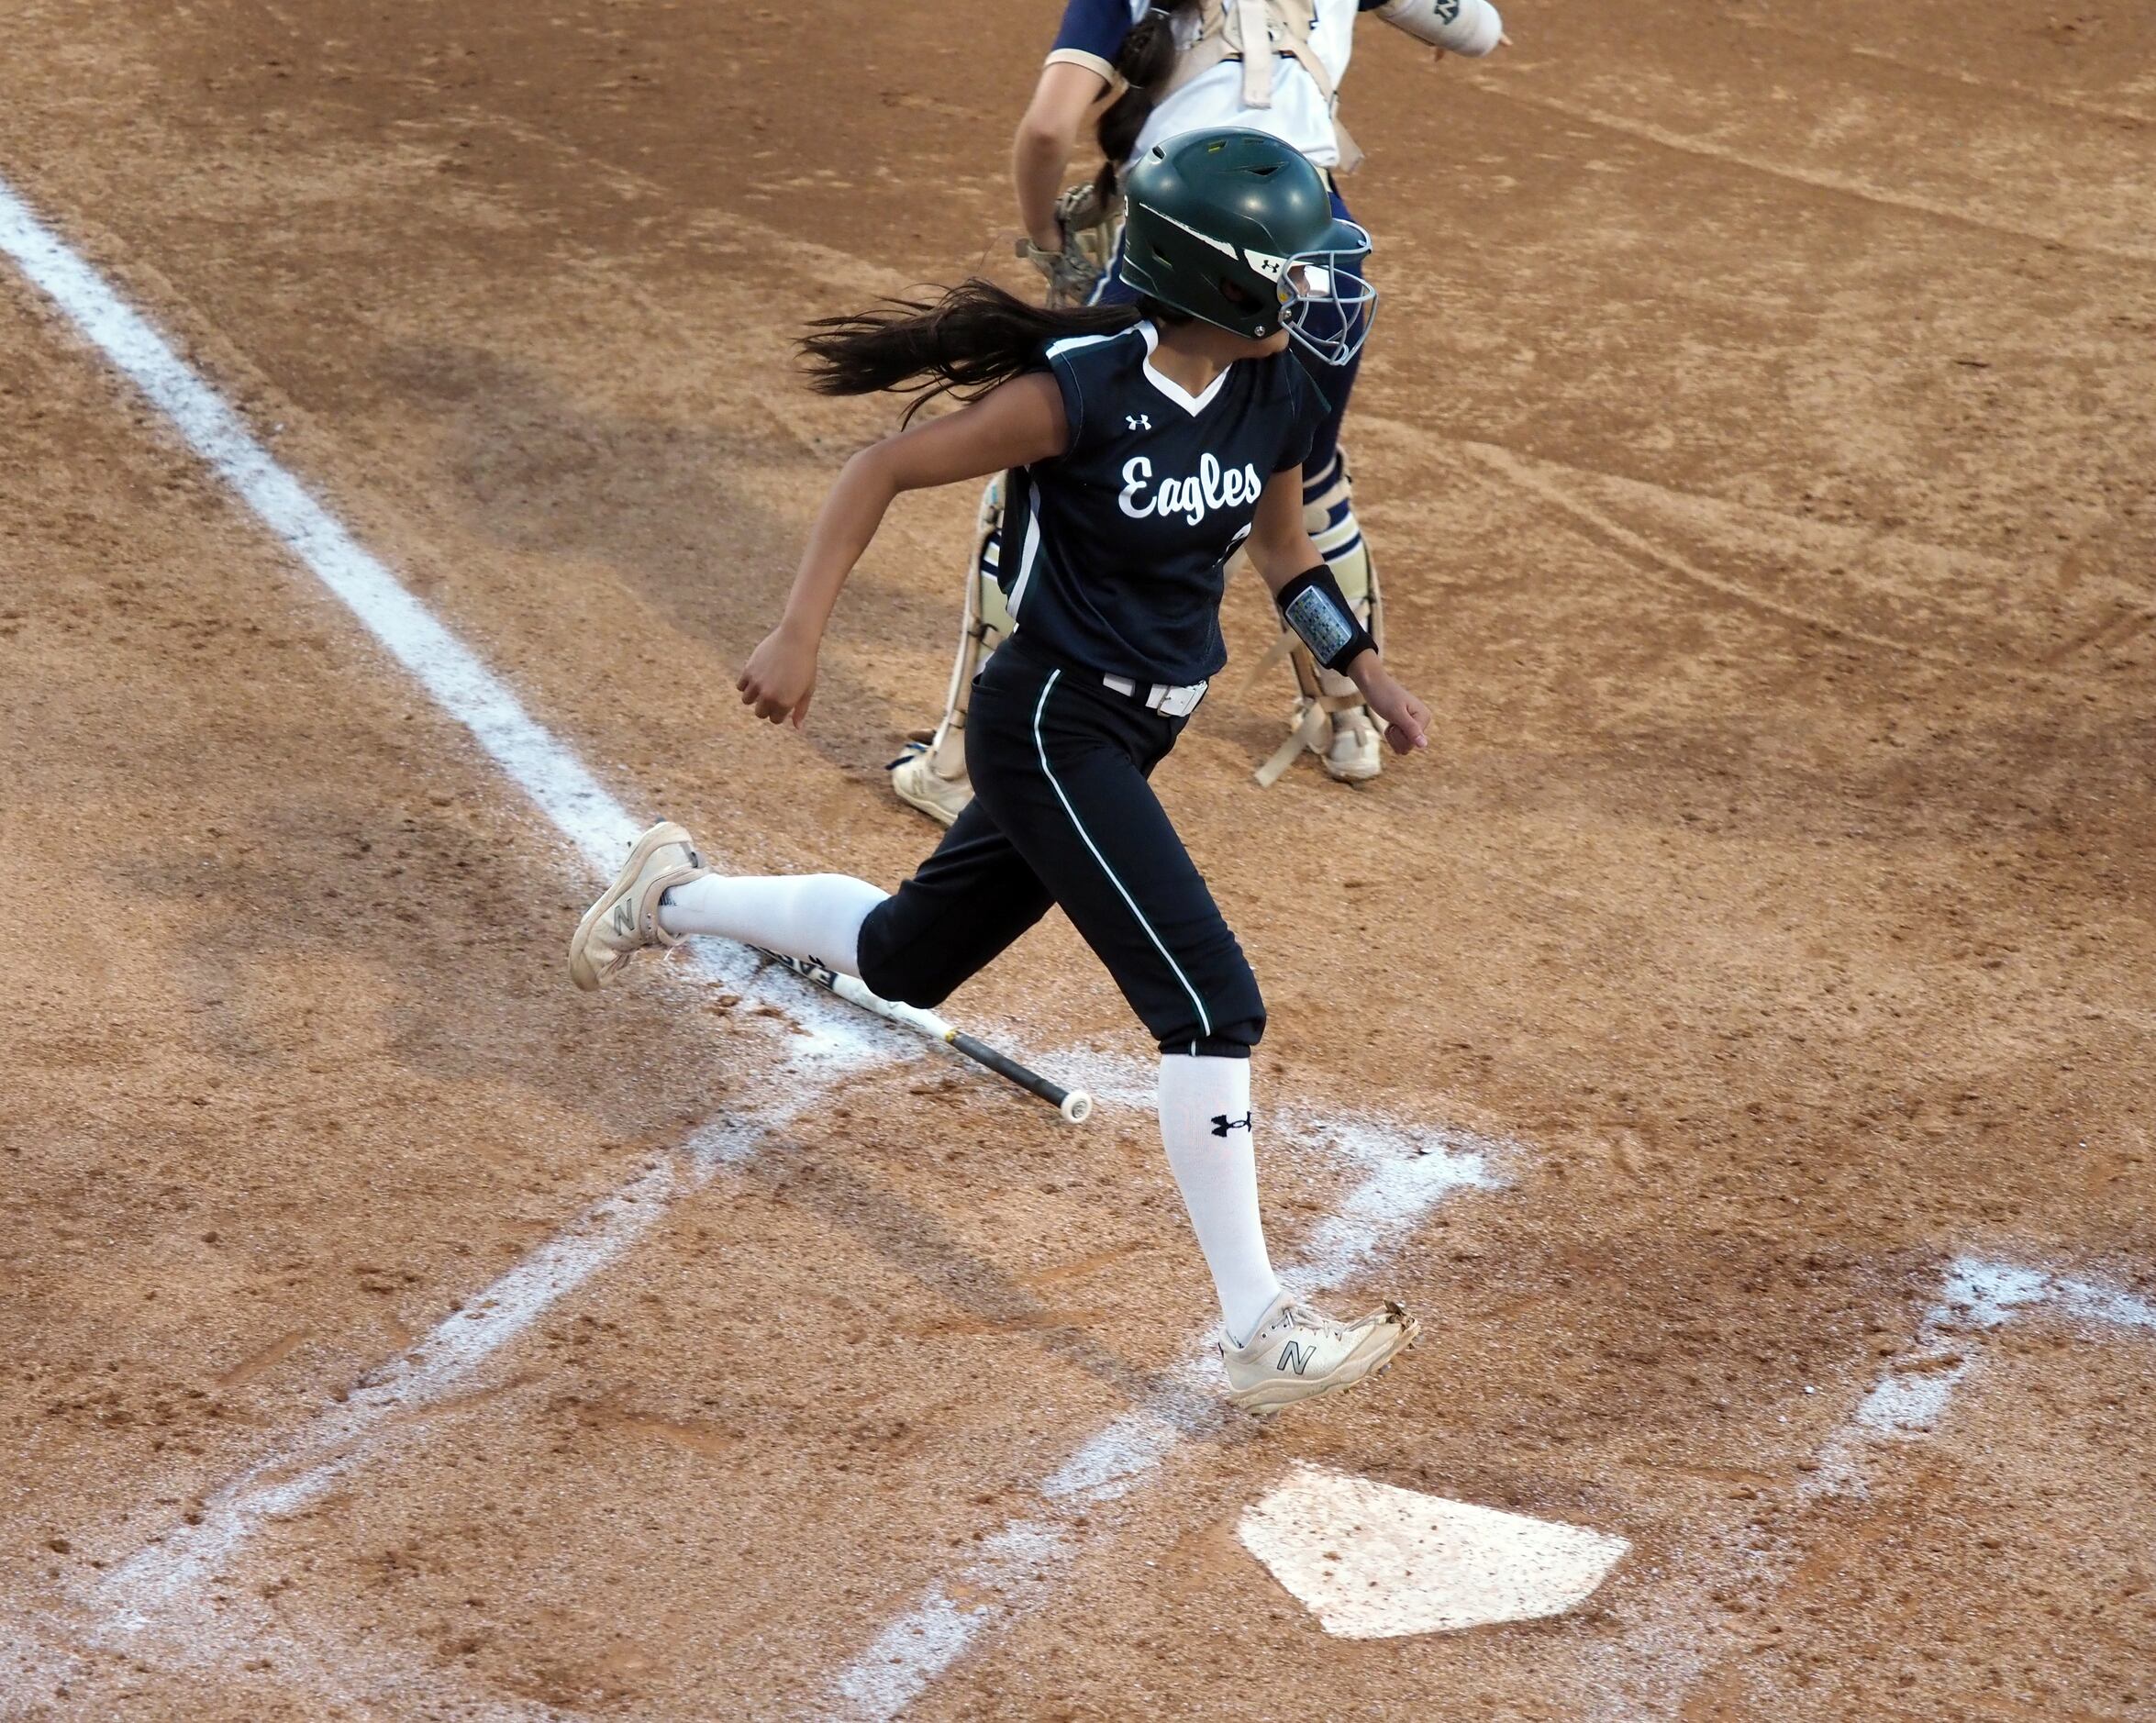 Mansfield Lake Ridge baserunner Avery Hang scores a run against Northside O’Connor in the...